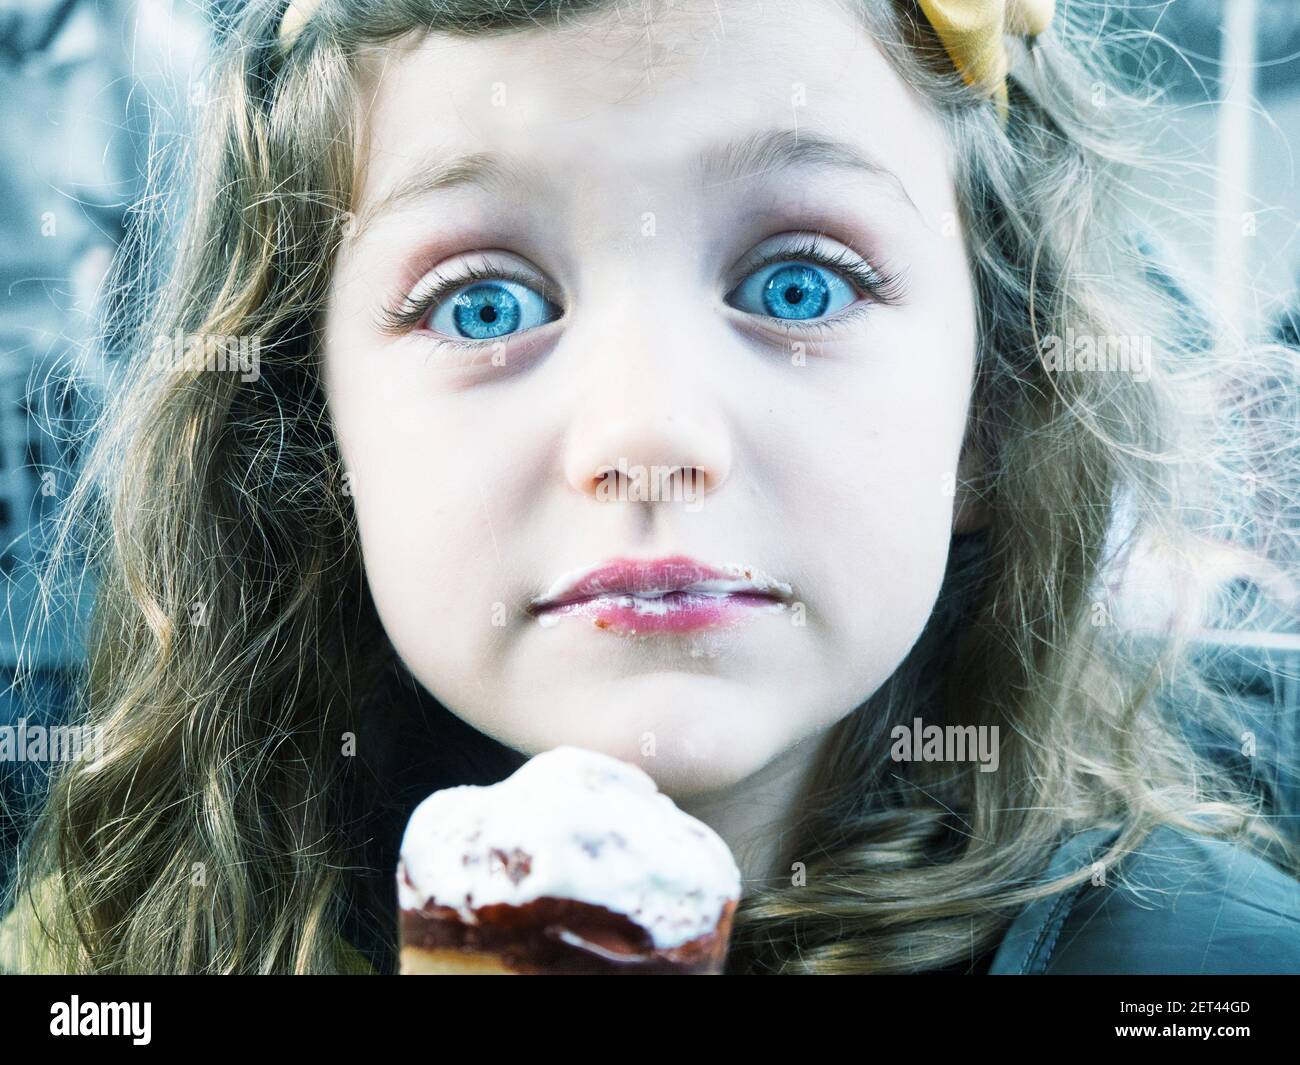 Portrait of a surprised girl with piercing blue eyes eating ice cream Stock Photo